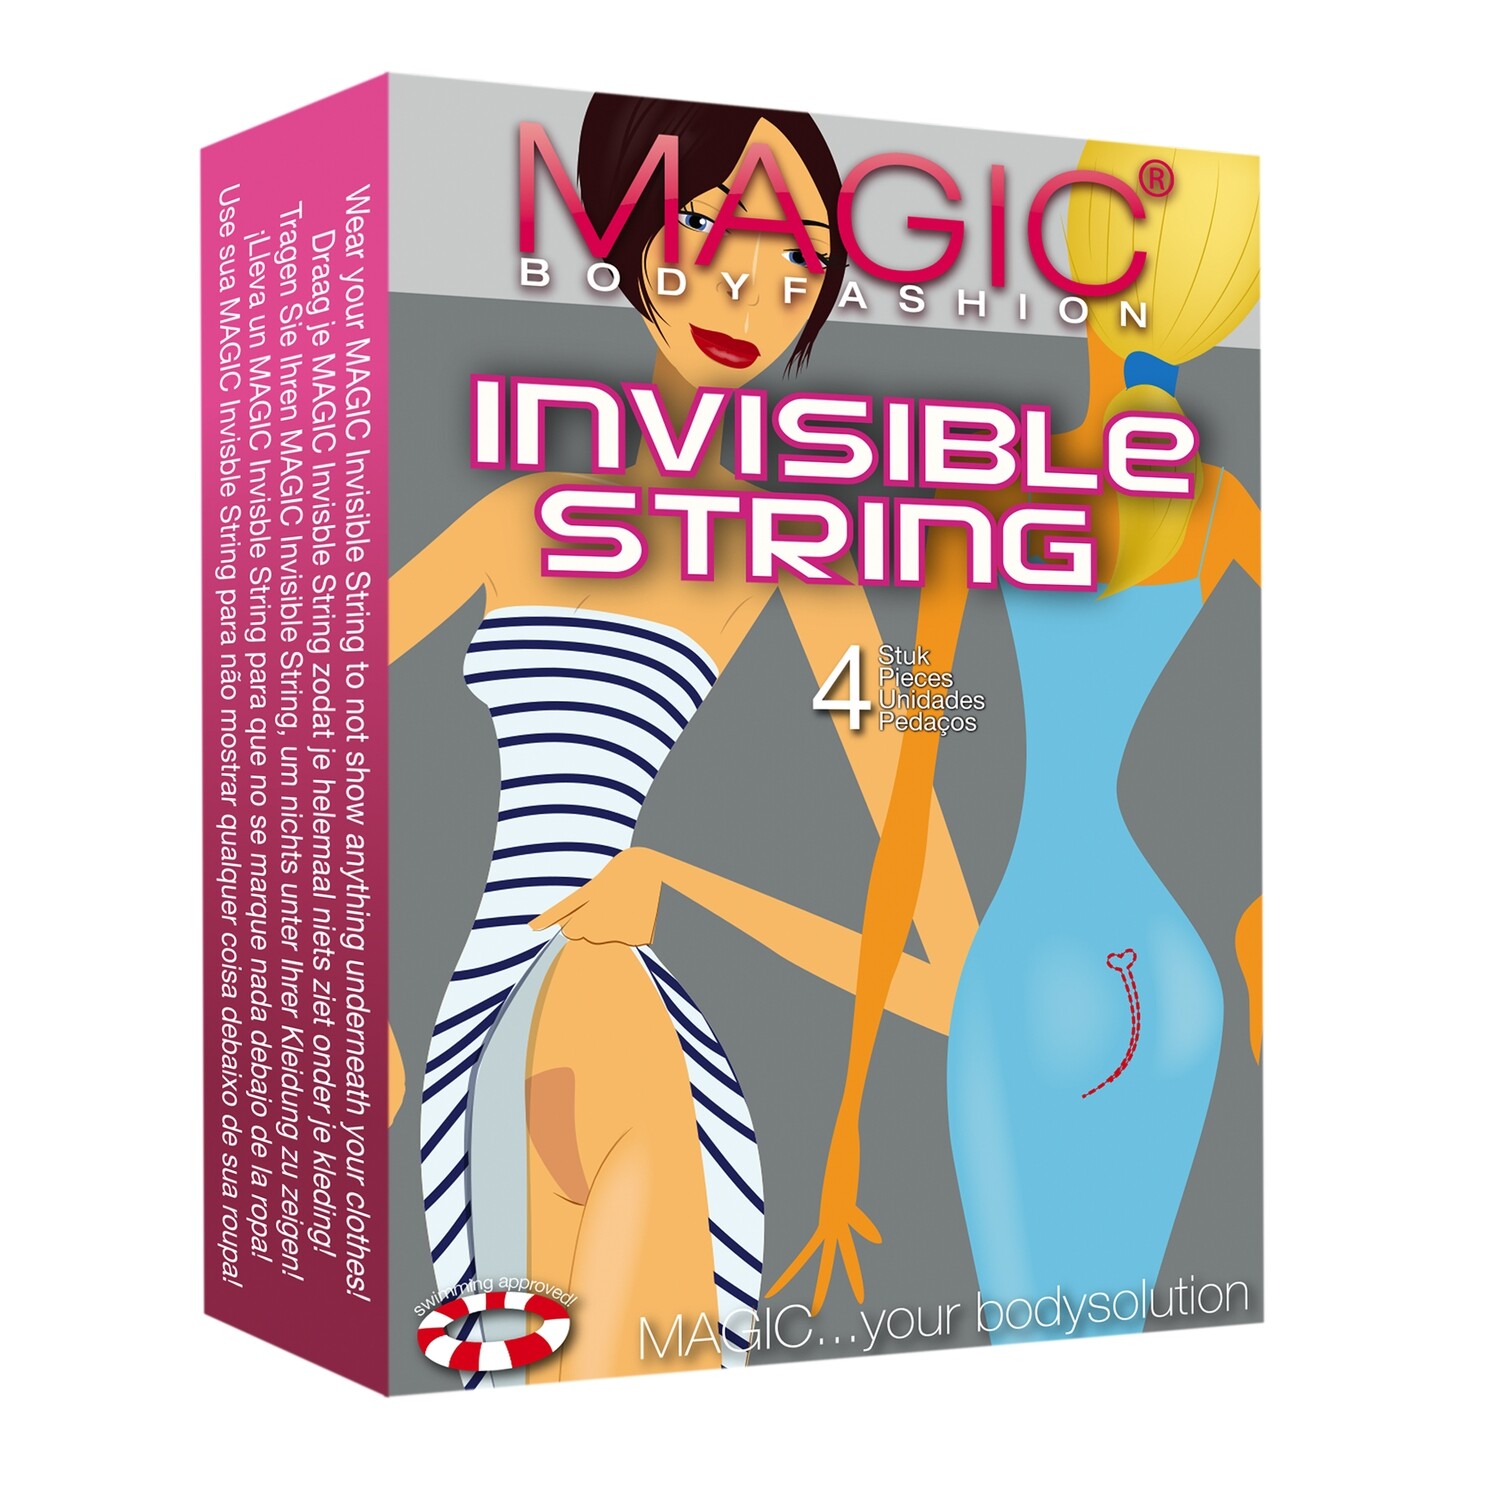 Magic invisible string, Size: ONE